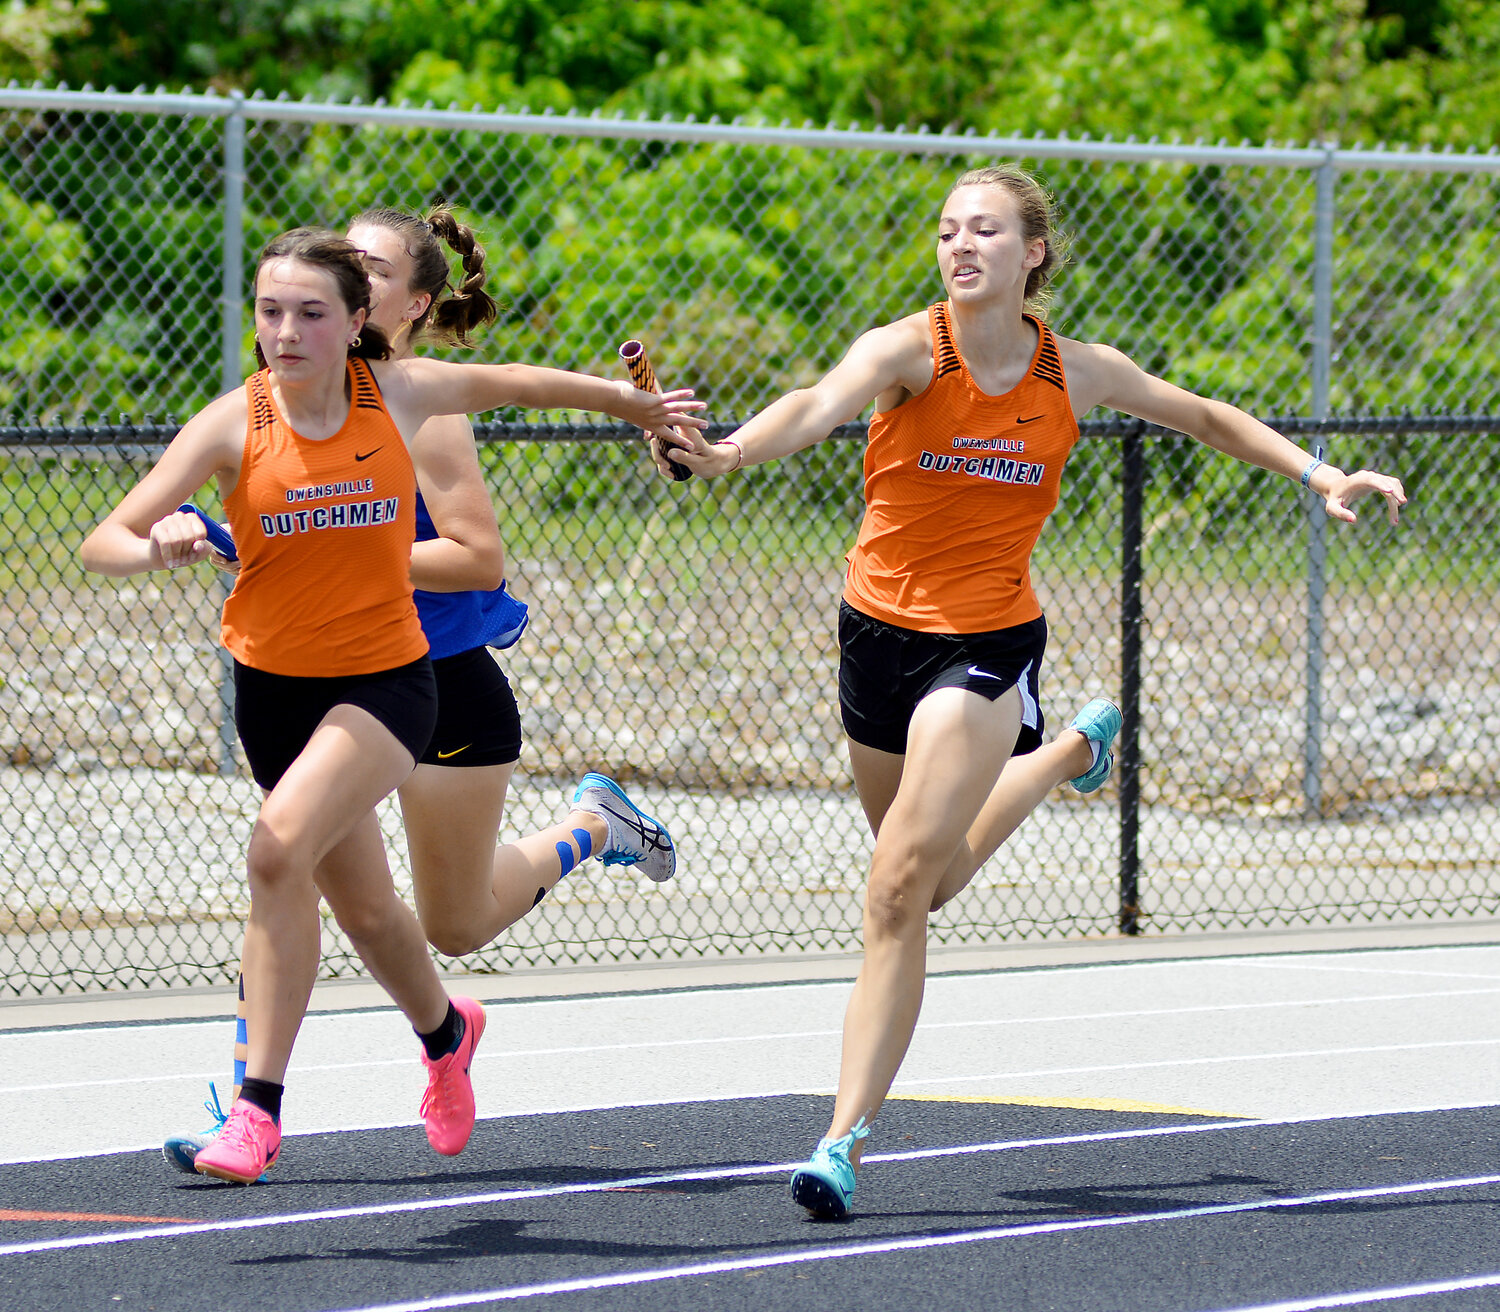 Emma-lee Wehmeyer (far left) reaches back for the baton from Dutchgirl teammate Ella Gehlert during the girls 4x200-meter relay Saturday at the Missouri State High School Activities Association (MSHSAA) Class 3, District 5 Track Meet at Waynesville High School.